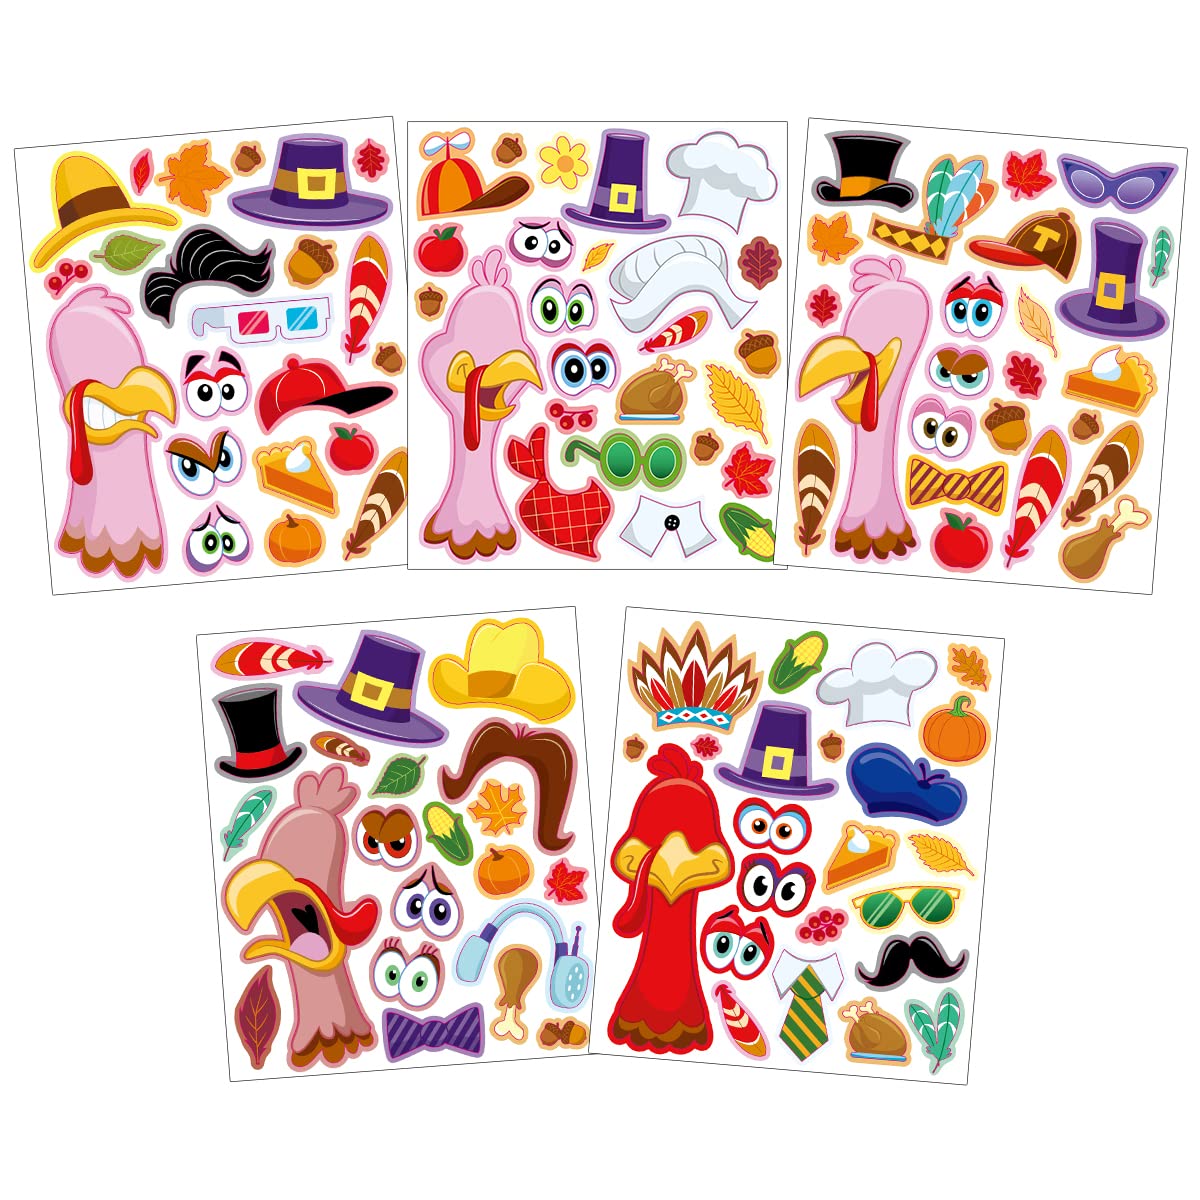 JOYIN 40 PCS Thanksgiving Crafts Make A Turkey Sticker Make A Face Sticker Sheets Make Your Own Characters Thanksgiving Game Holiday School Classroom Prizes Party Favor Supplies